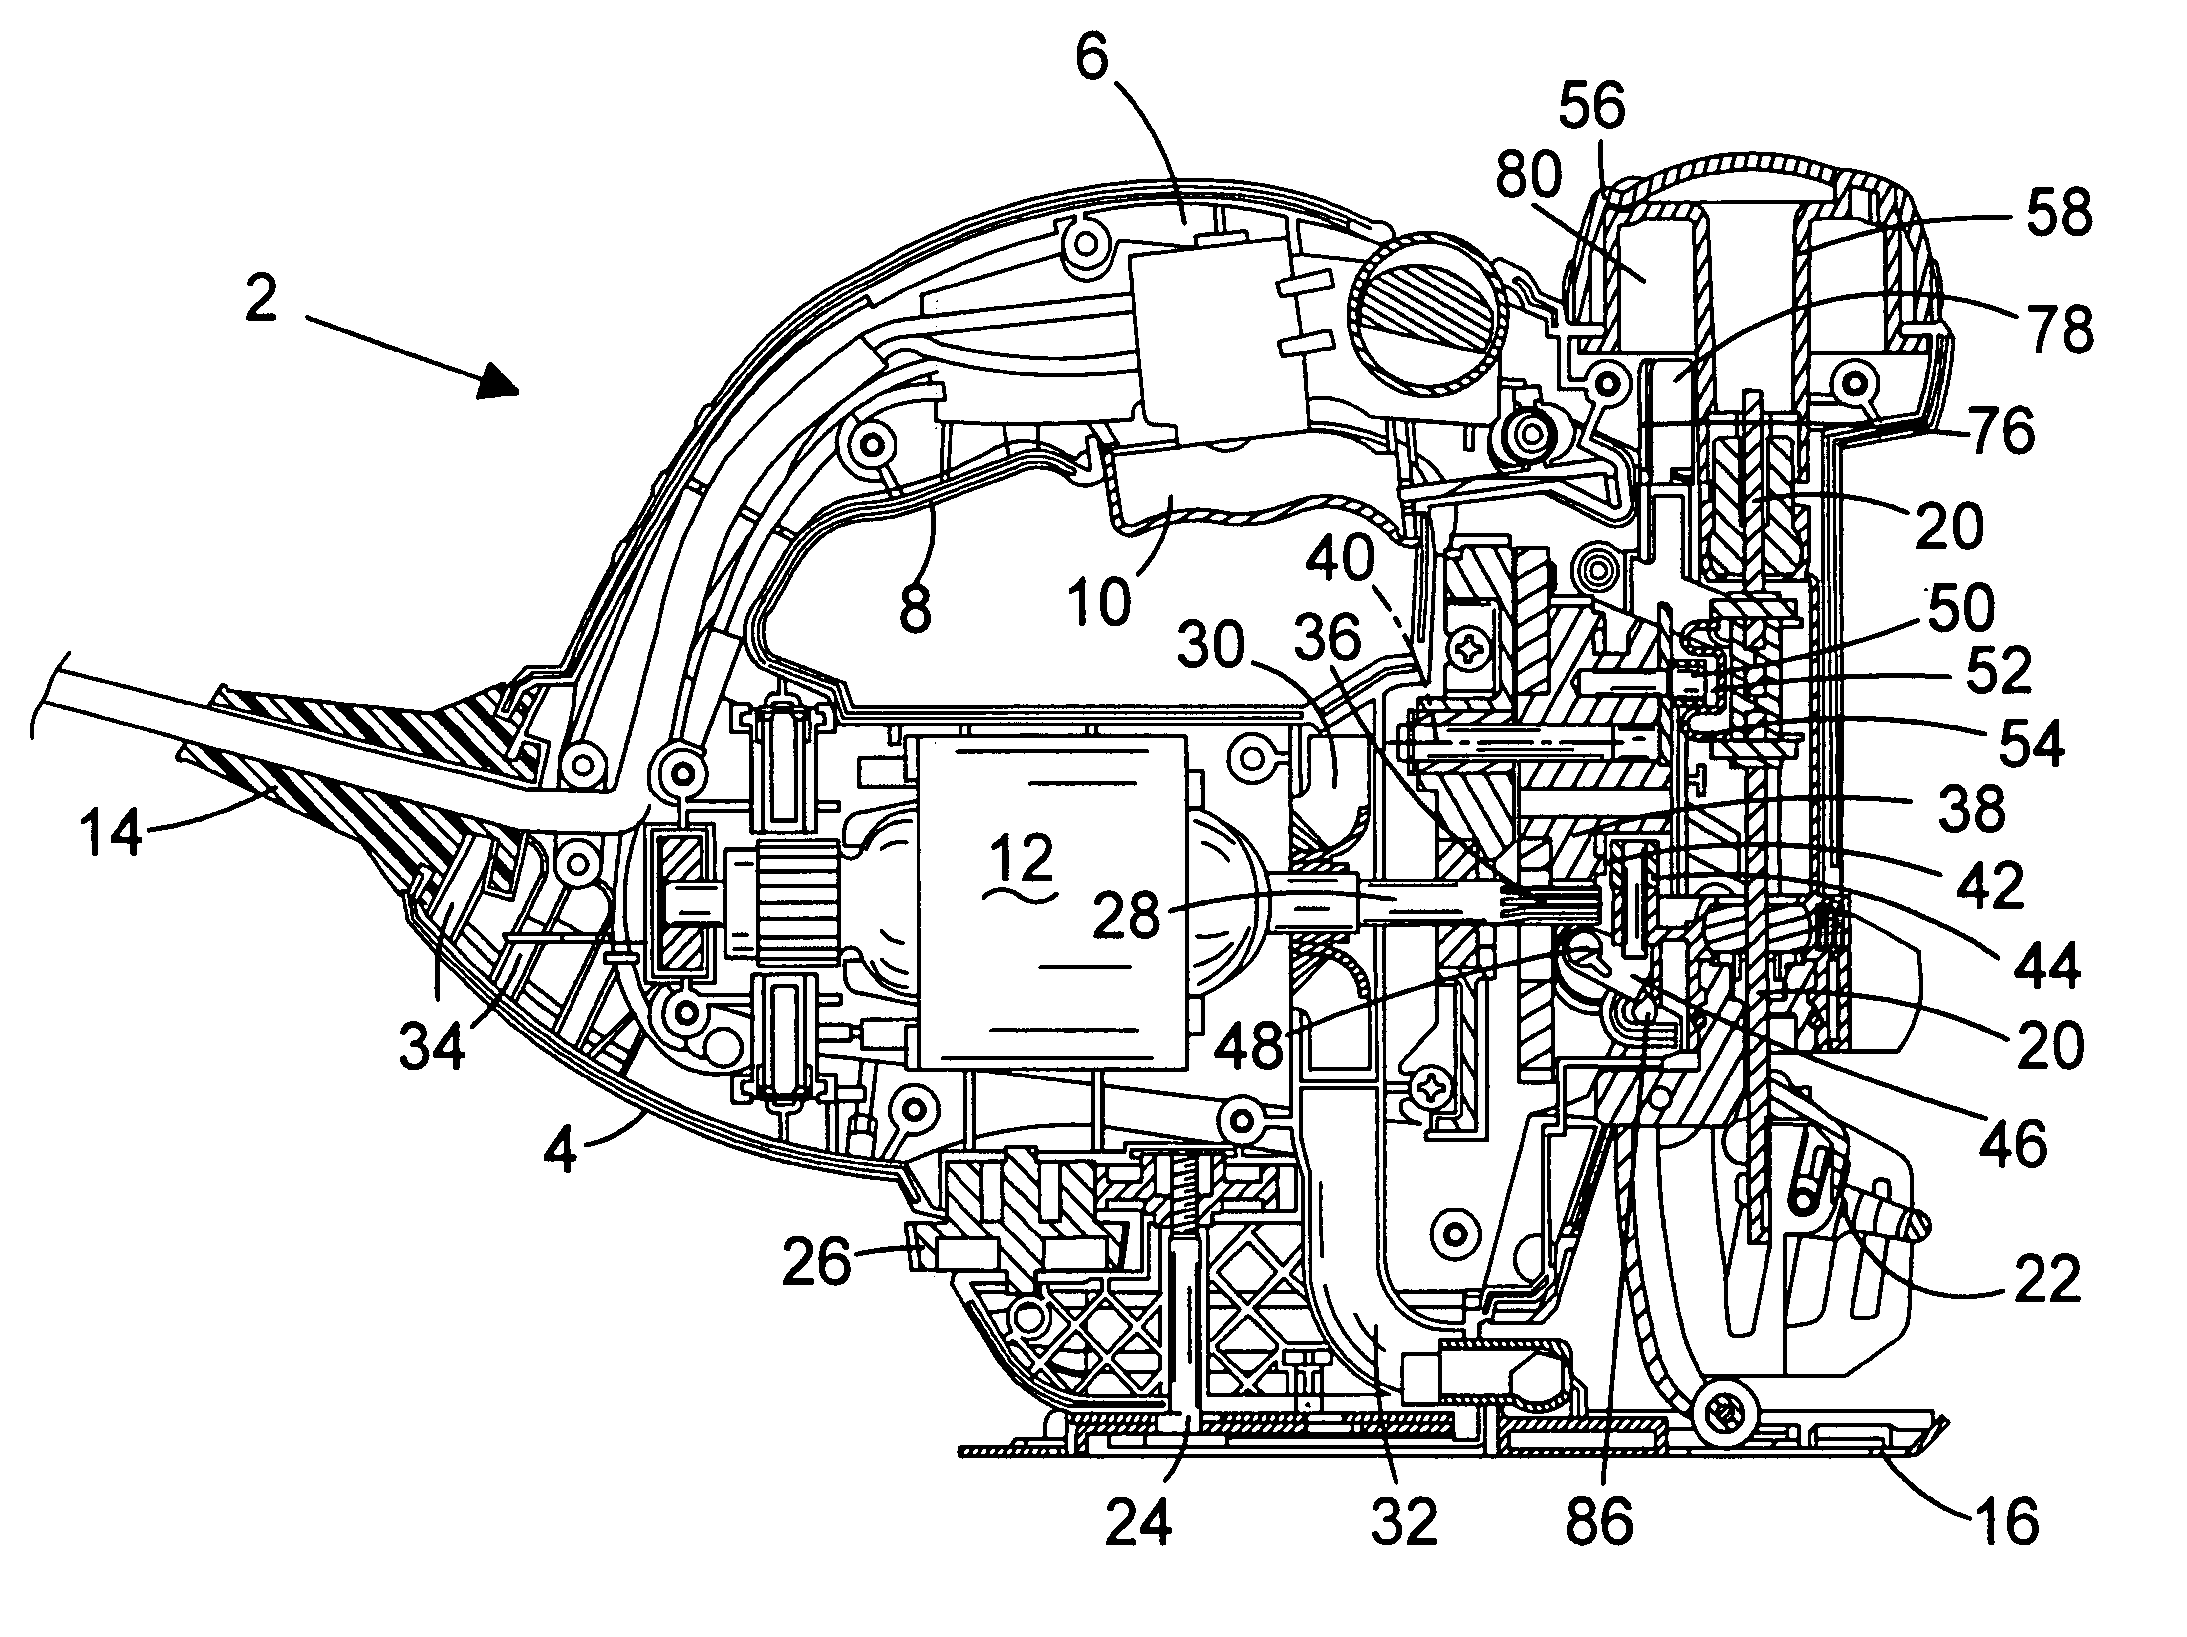 Output shaft assembly for power tool and power tool incorporating such assembly